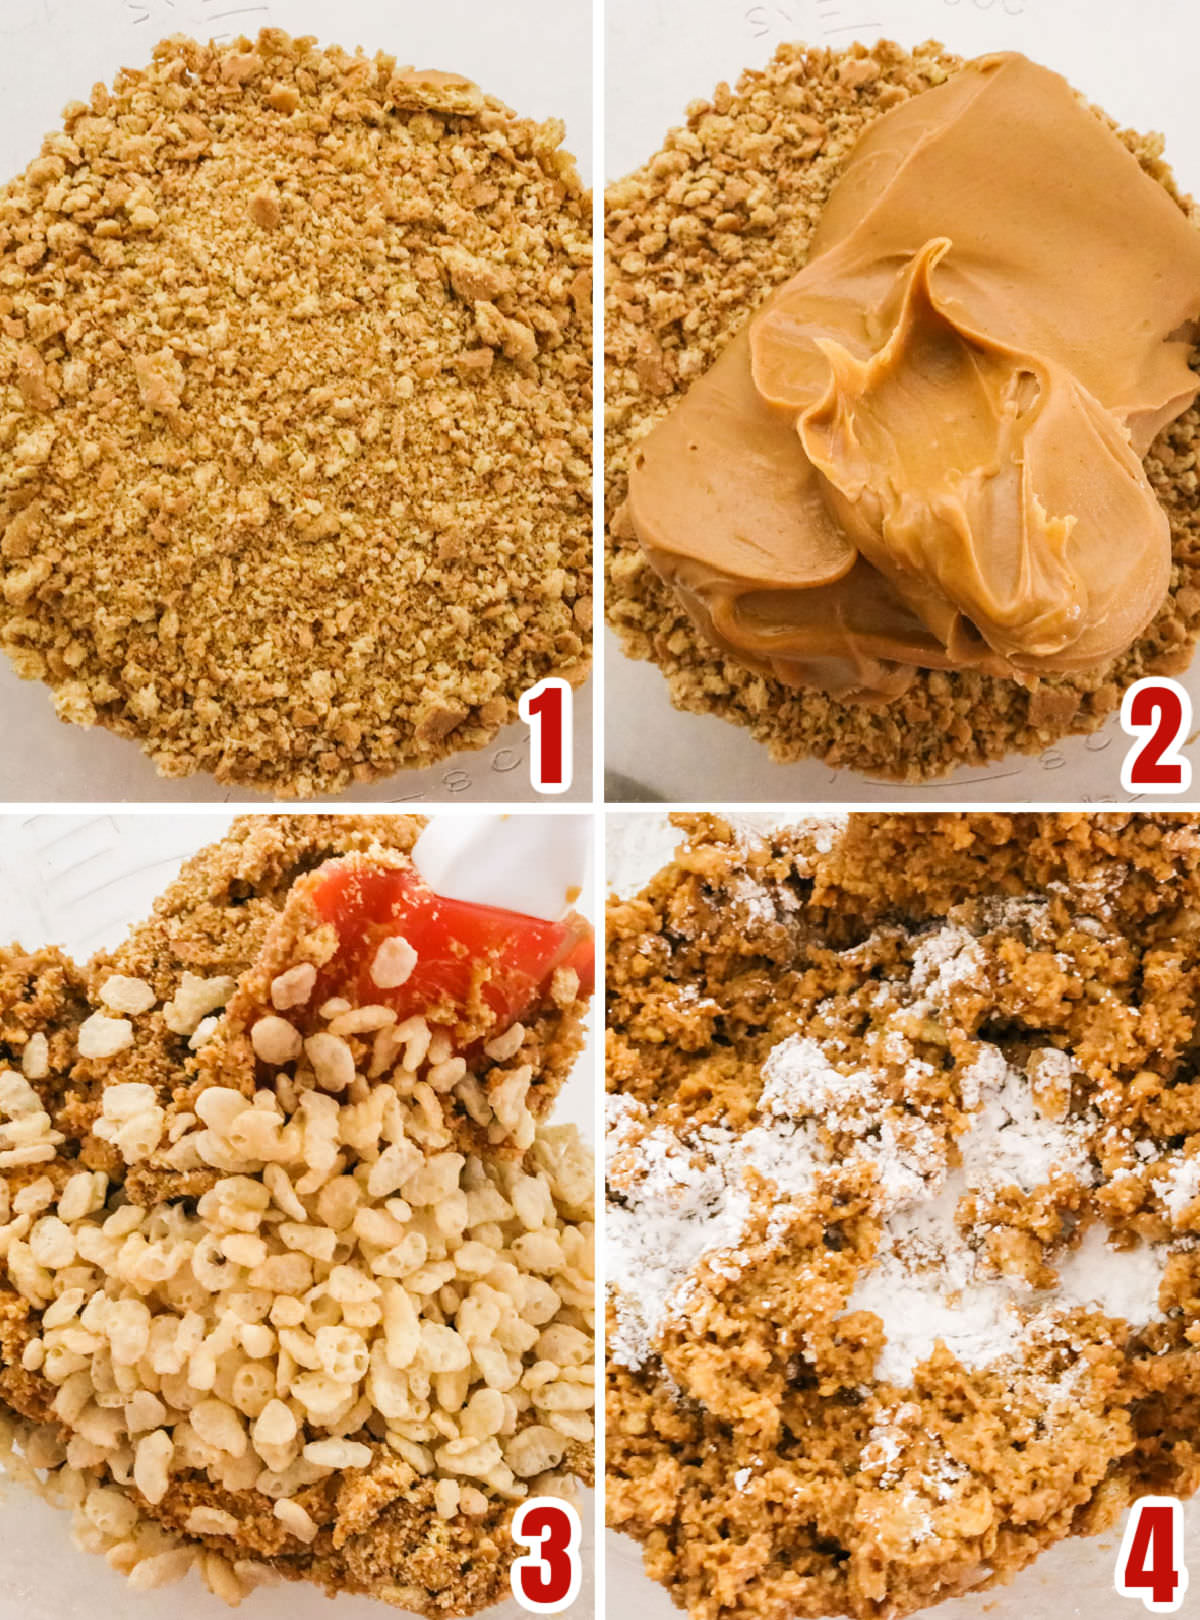 Collage image showing how to make the peanut butter candy filling.